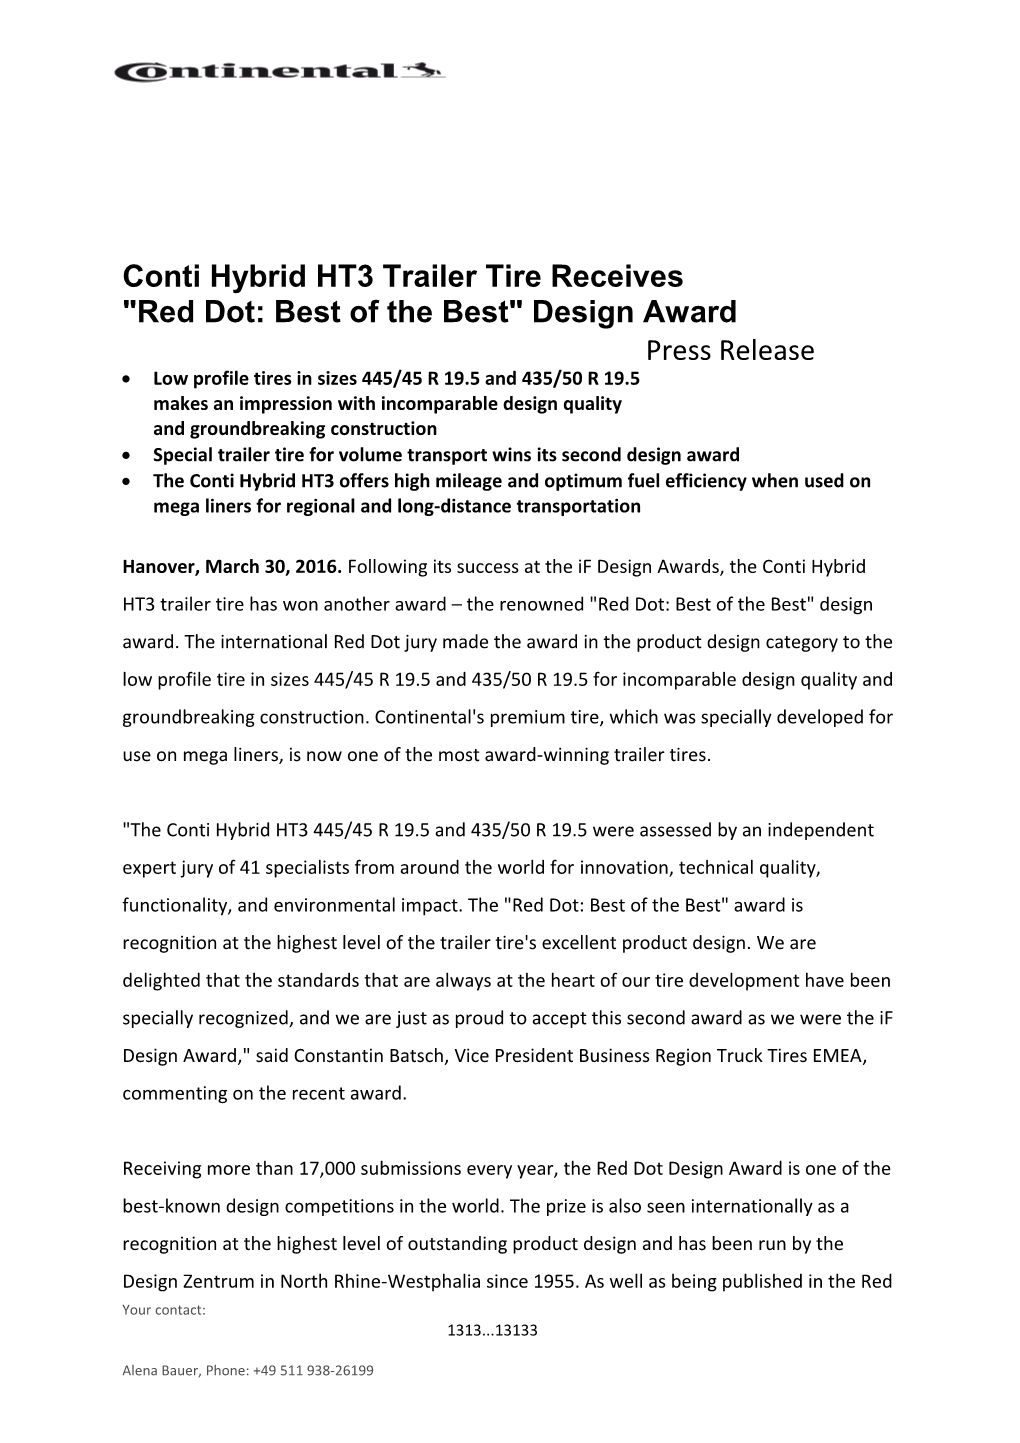 Conti Hybrid HT3 Trailer Tire Receives Red Dot: Best of the Best Design Award